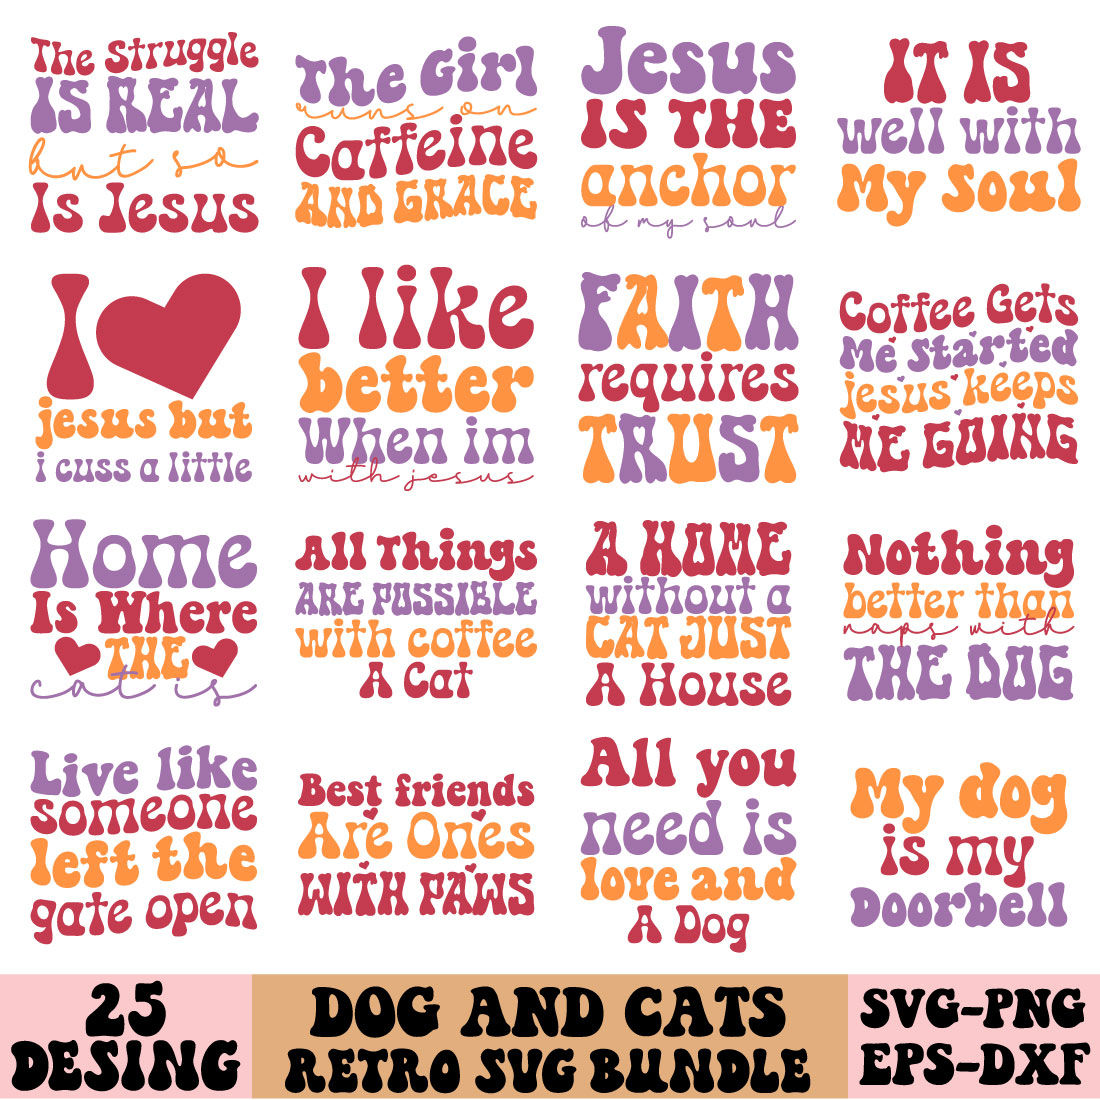 dog and cat retro svg cover image.